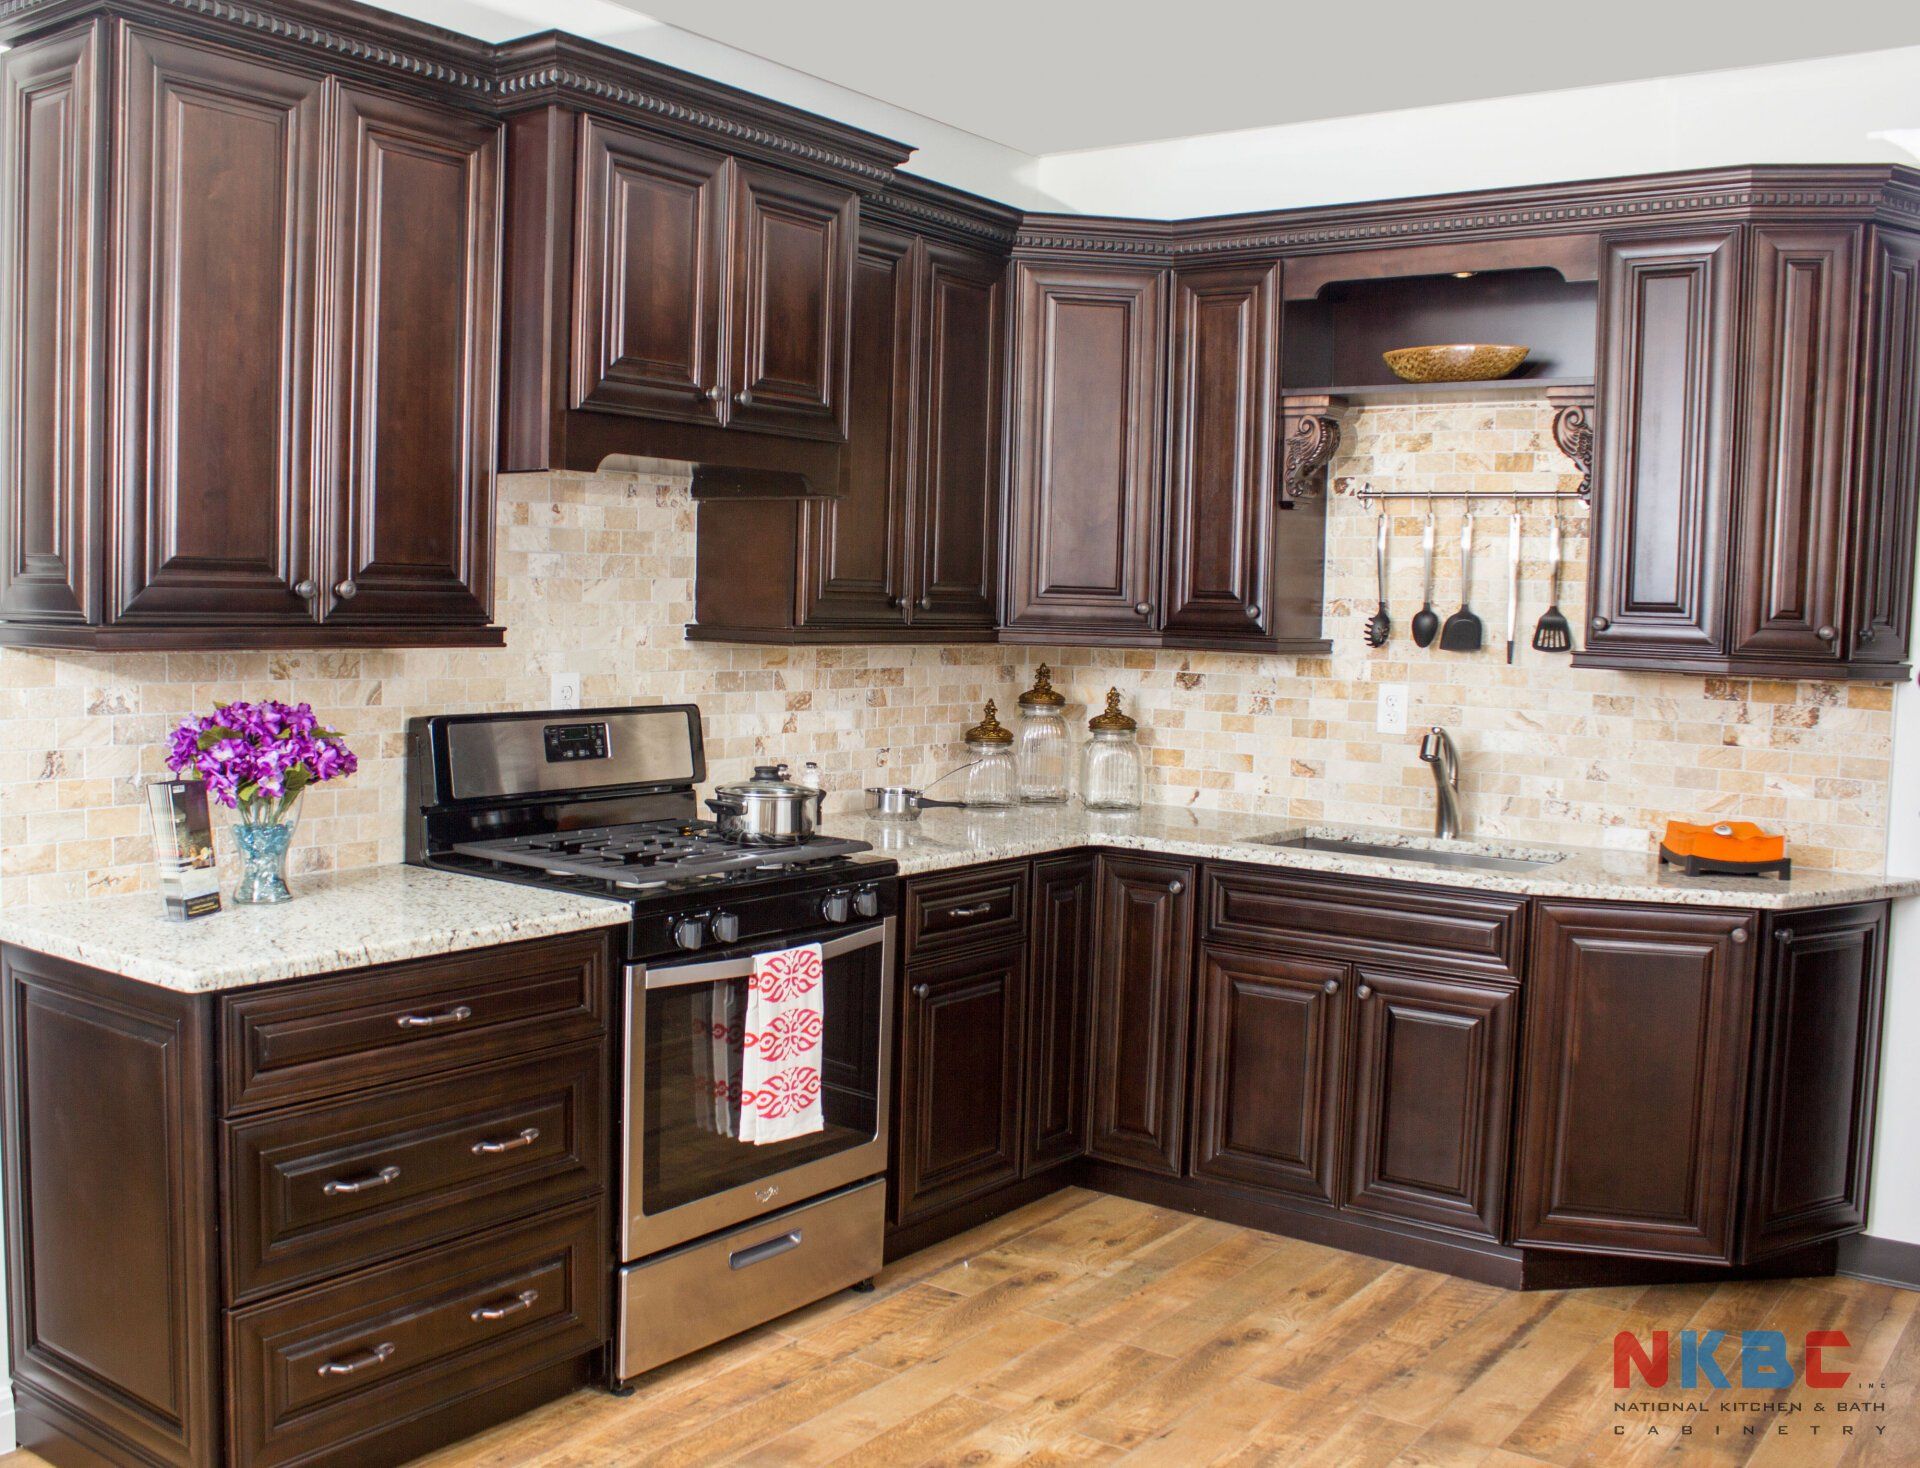 national kitchen and bath cabinetry romeoville il